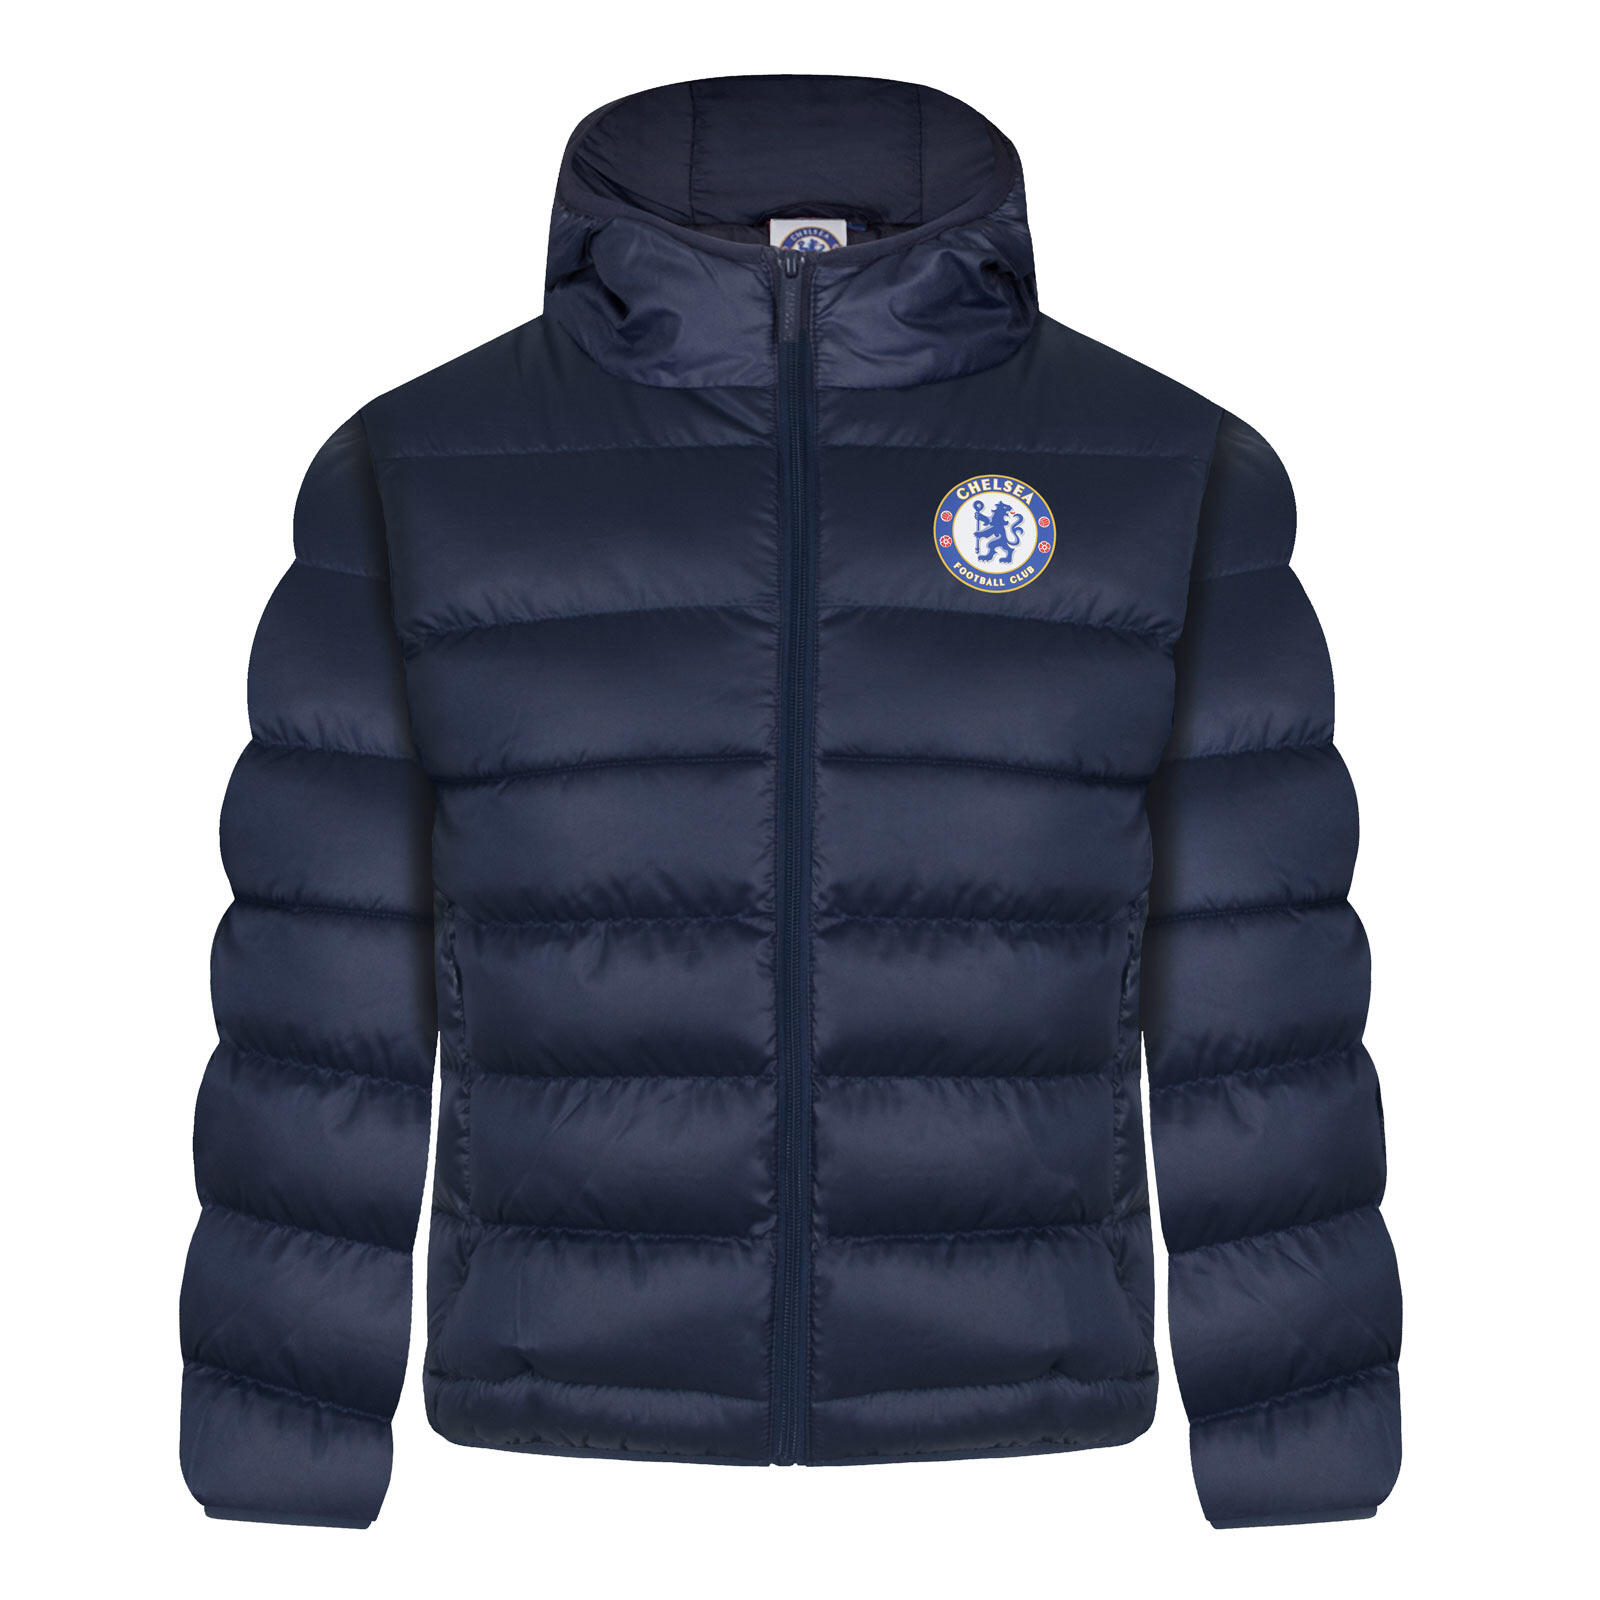 CHELSEA Chelsea FC Boys Jacket Hooded Winter Quilted Kids OFFICIAL Football Gift